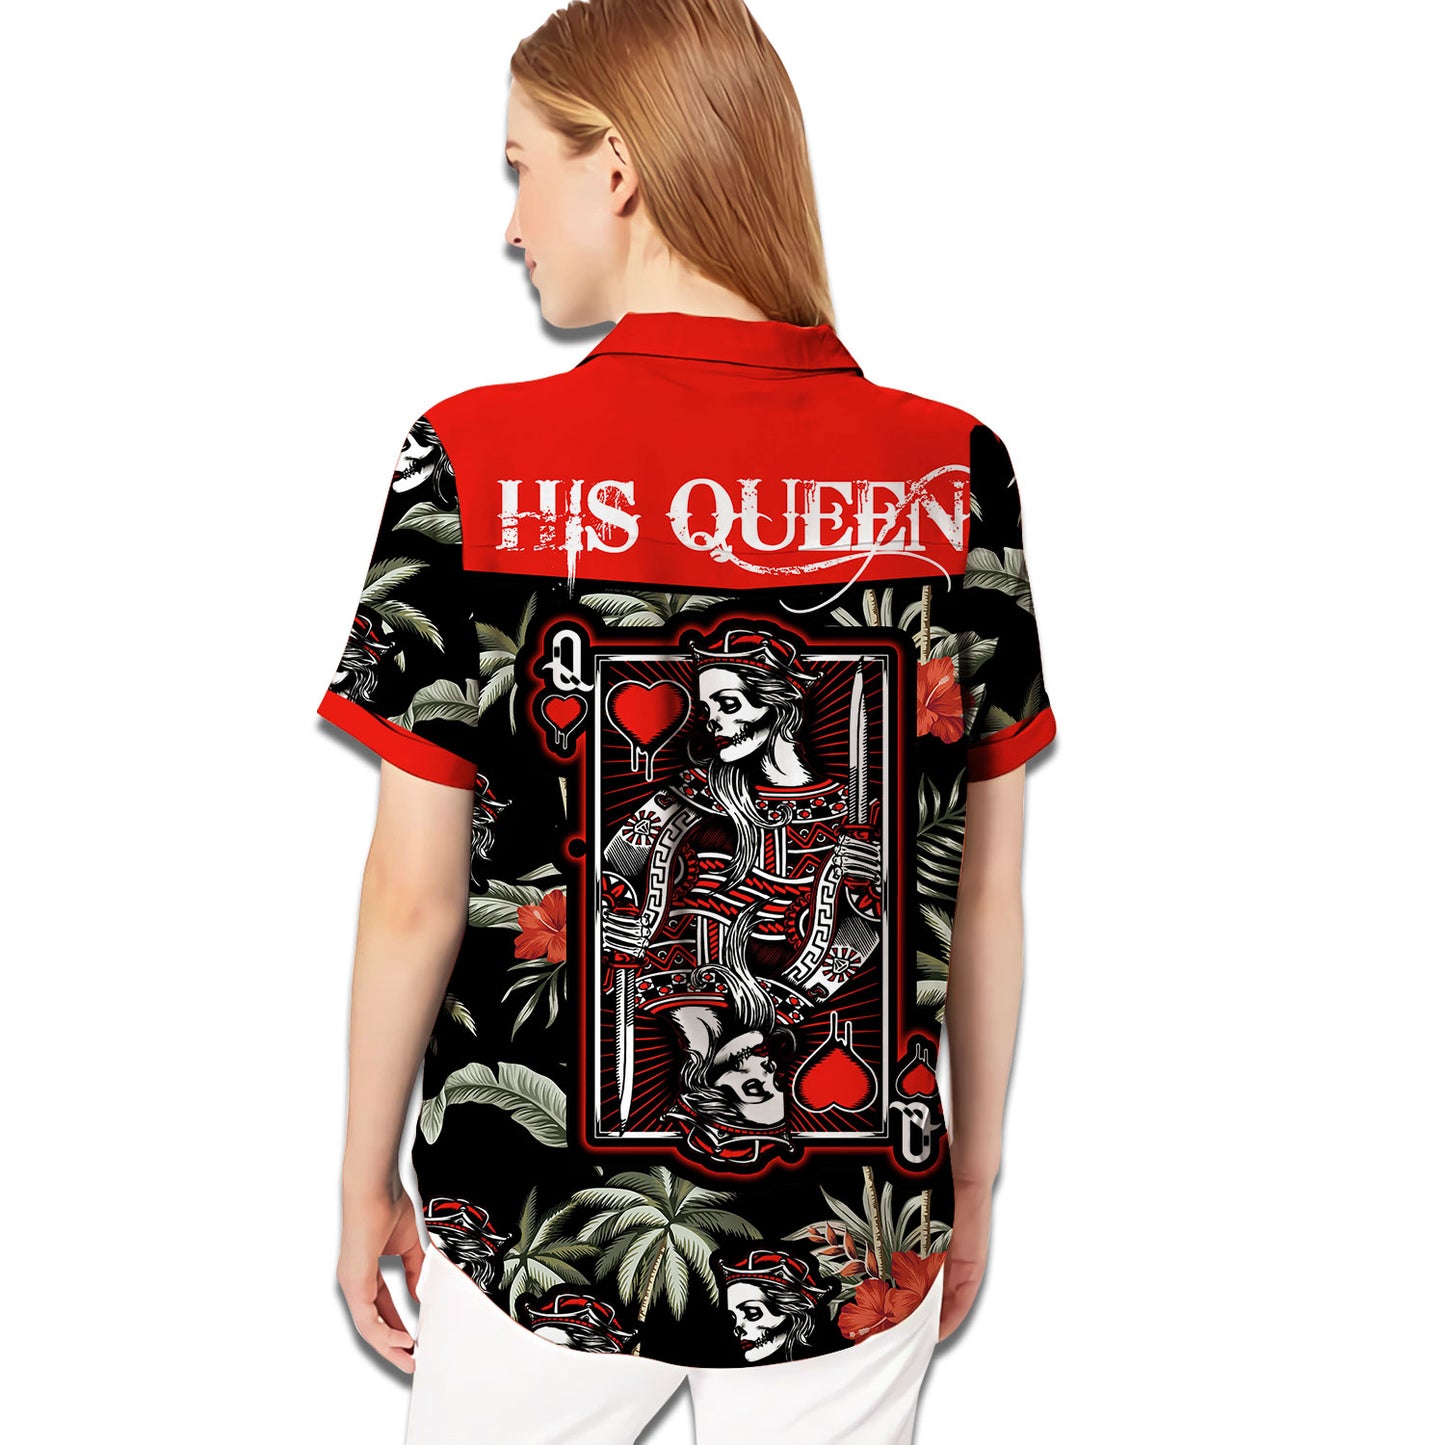 Her King His Queen Matching Hawaiian Shirt Personalizedwitch For Couple